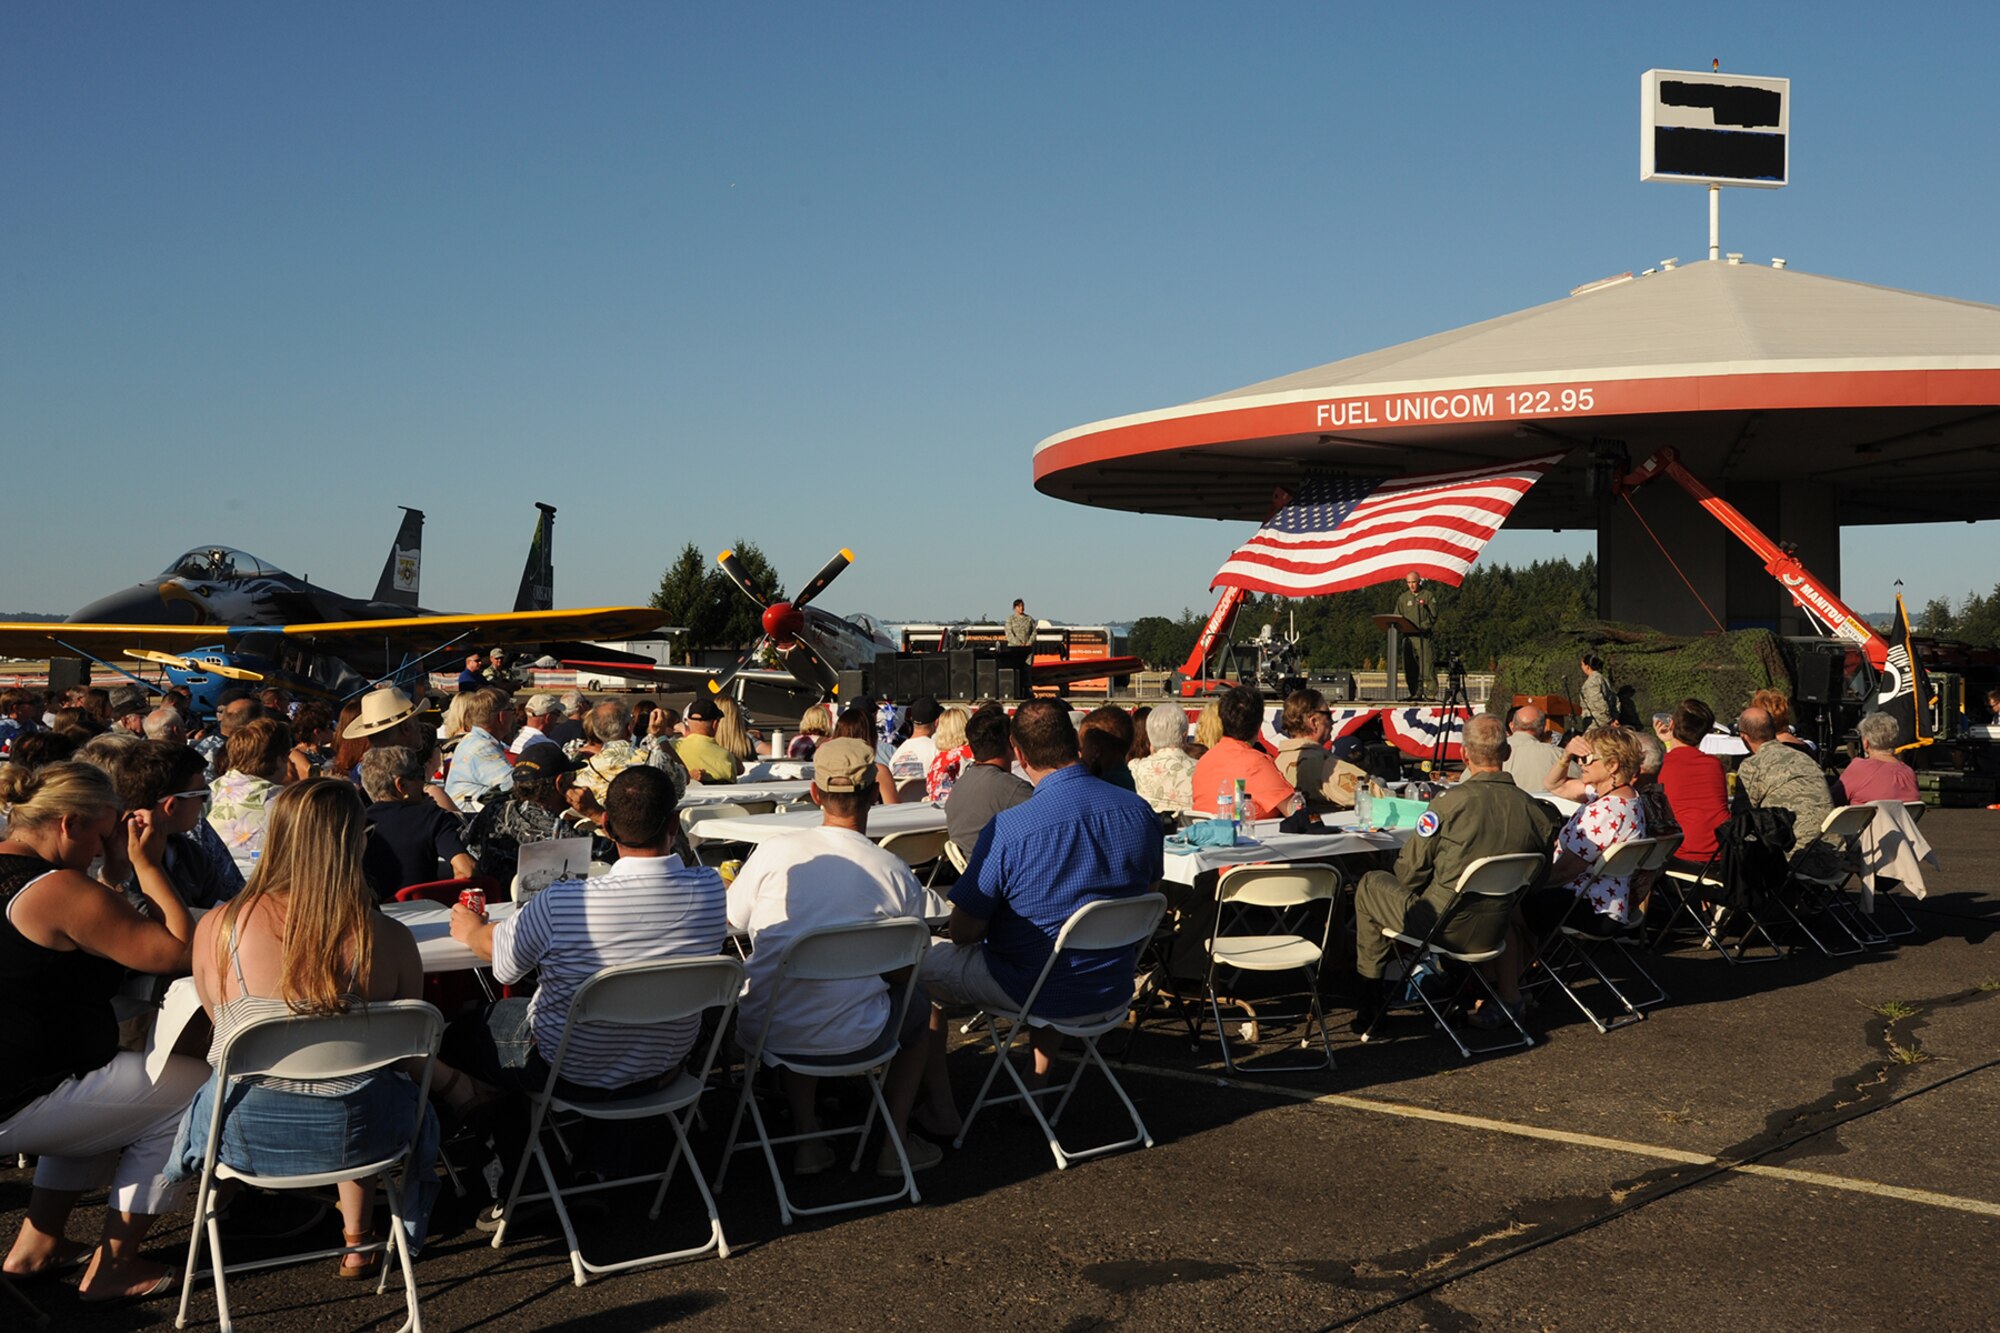 Current and retired members of the Oregon Air National Guard gather for an afterhours “All Call” celebration as part of the 75th Anniversary of the Oregon Air National Guard during the Oregon International Air Show, Hillsboro, Ore., Aug. 6, 2016. (U.S. Air National Guard photo by Master Sgt. Shelly Davison, 142nd Fighter Wing Public Affairs/Released).